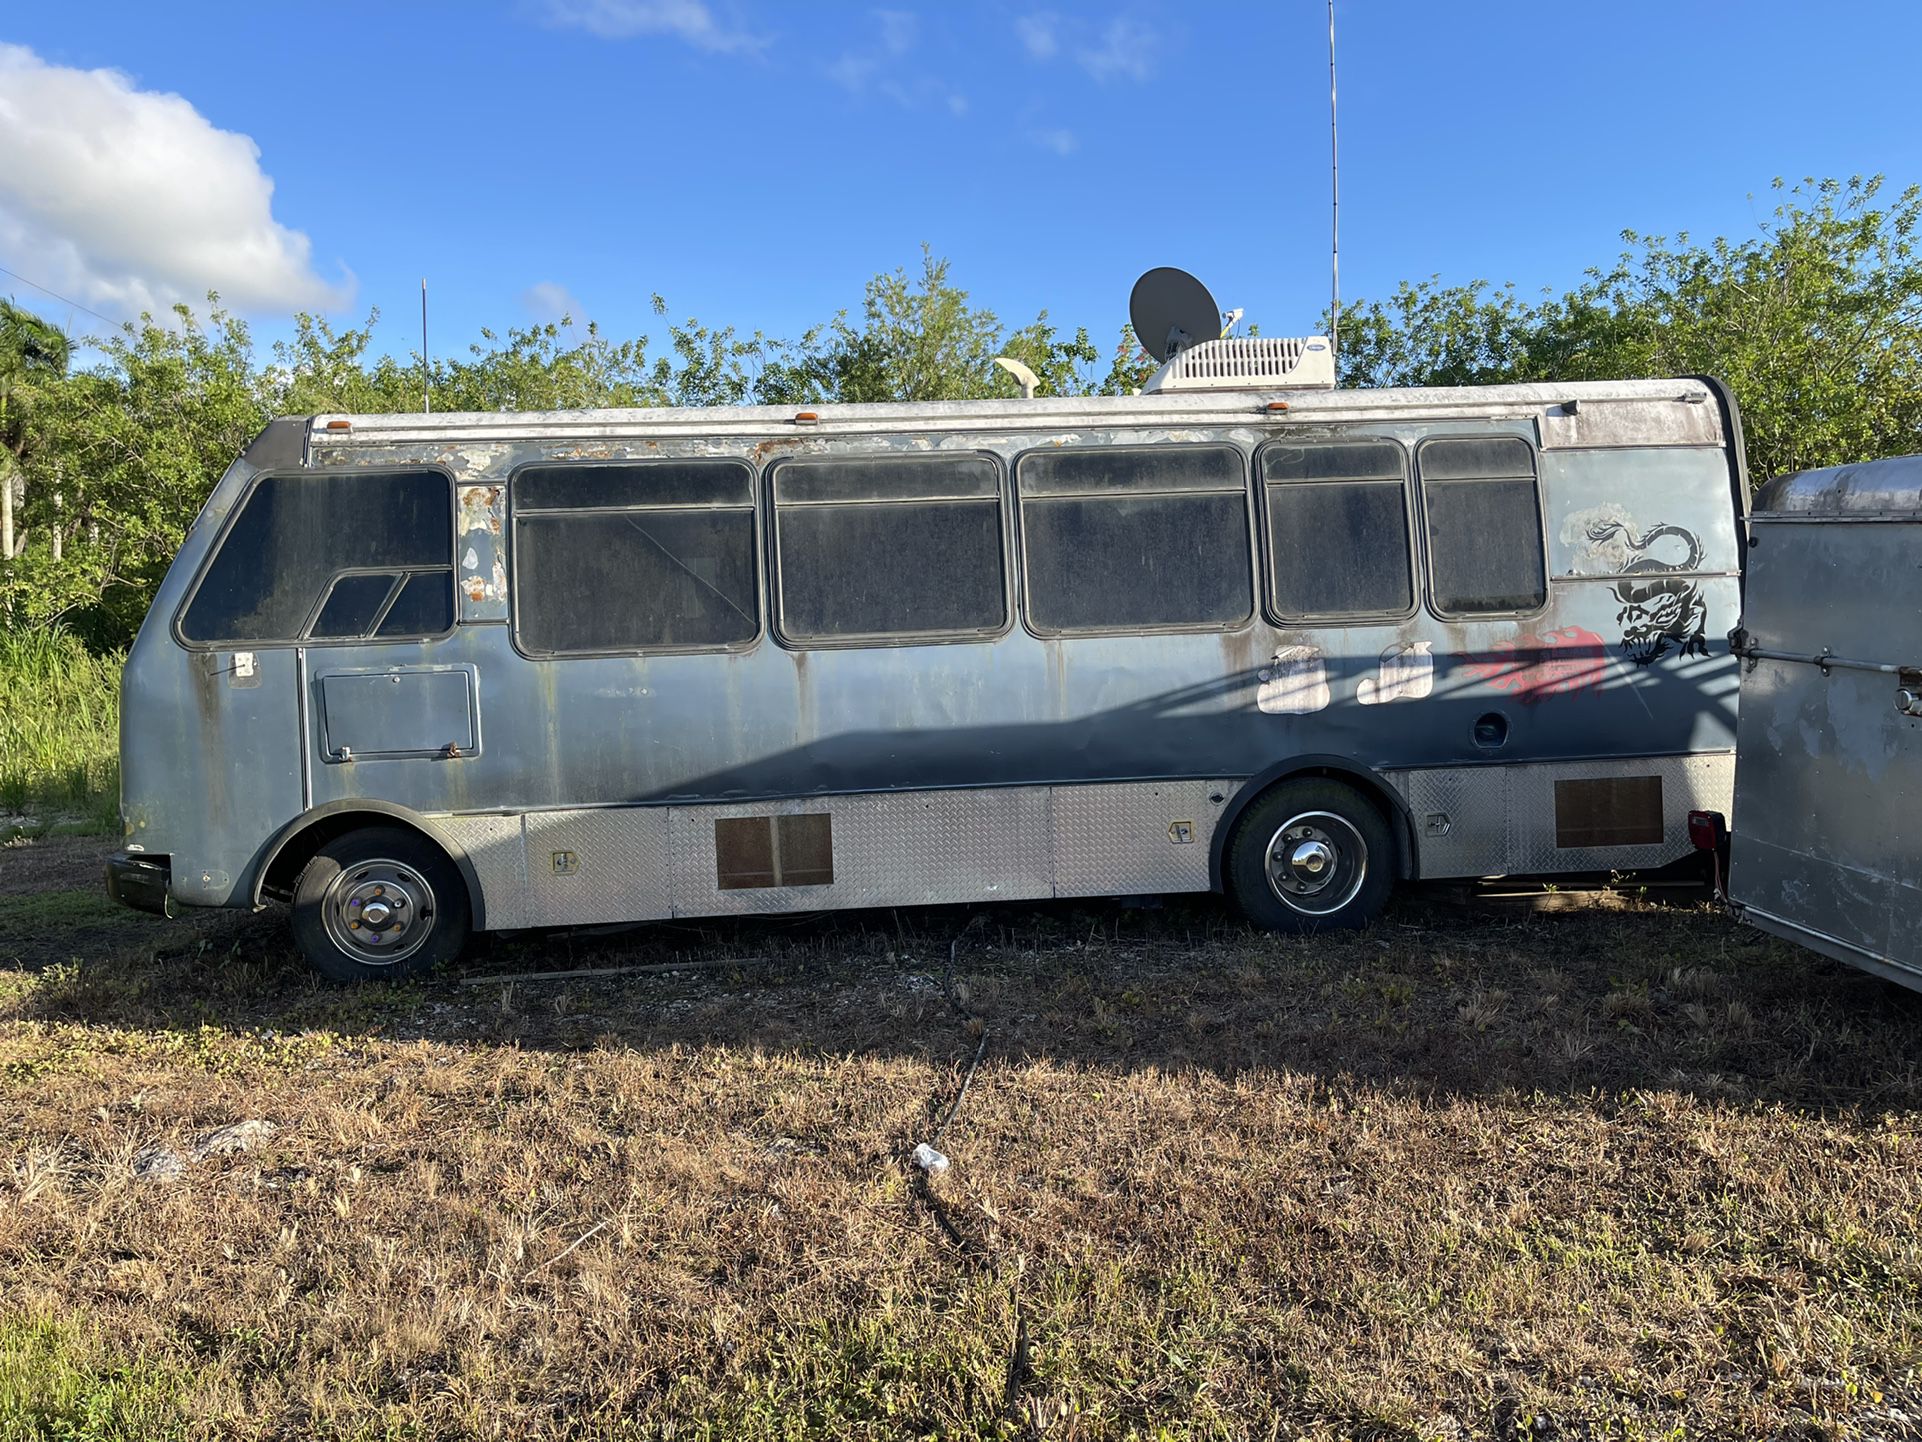 OSKOSH  DIESEL !!MOTORHOME CONVERSION 1991 26 FOOT!TRADE FOR A 40’ CONTAINER  OR A CARGO VAN !!